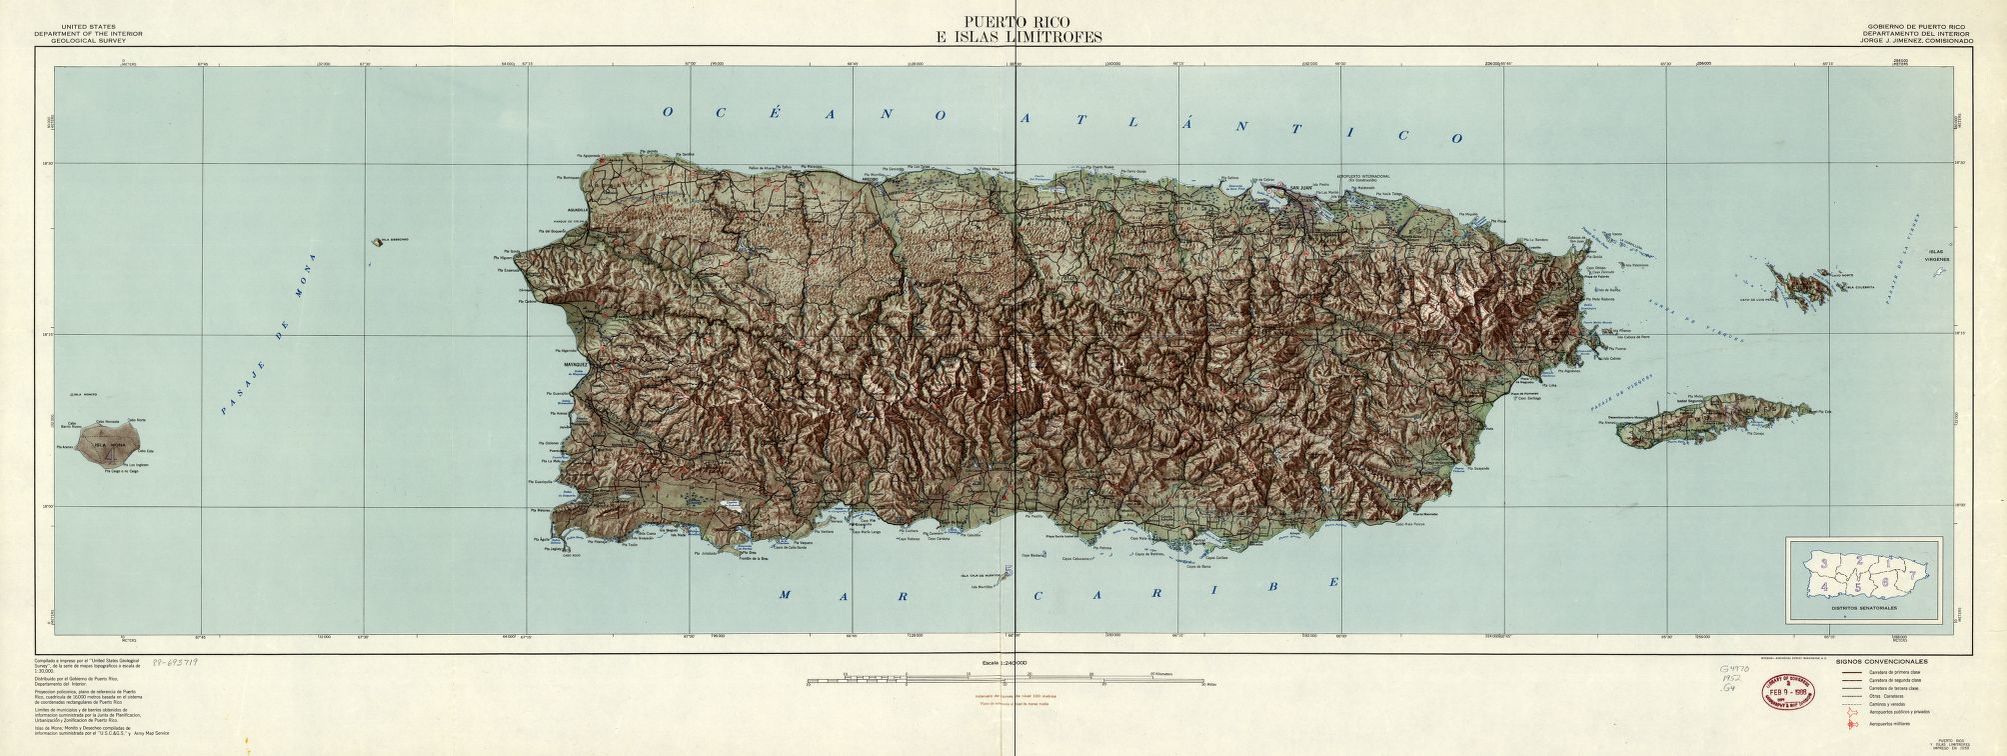 A topographic map of the islands of Vieques and Puerto Rico. Vieques lies about 7 miles off the east of Puerto Rico. (Image courtesy of Olasee Davis)